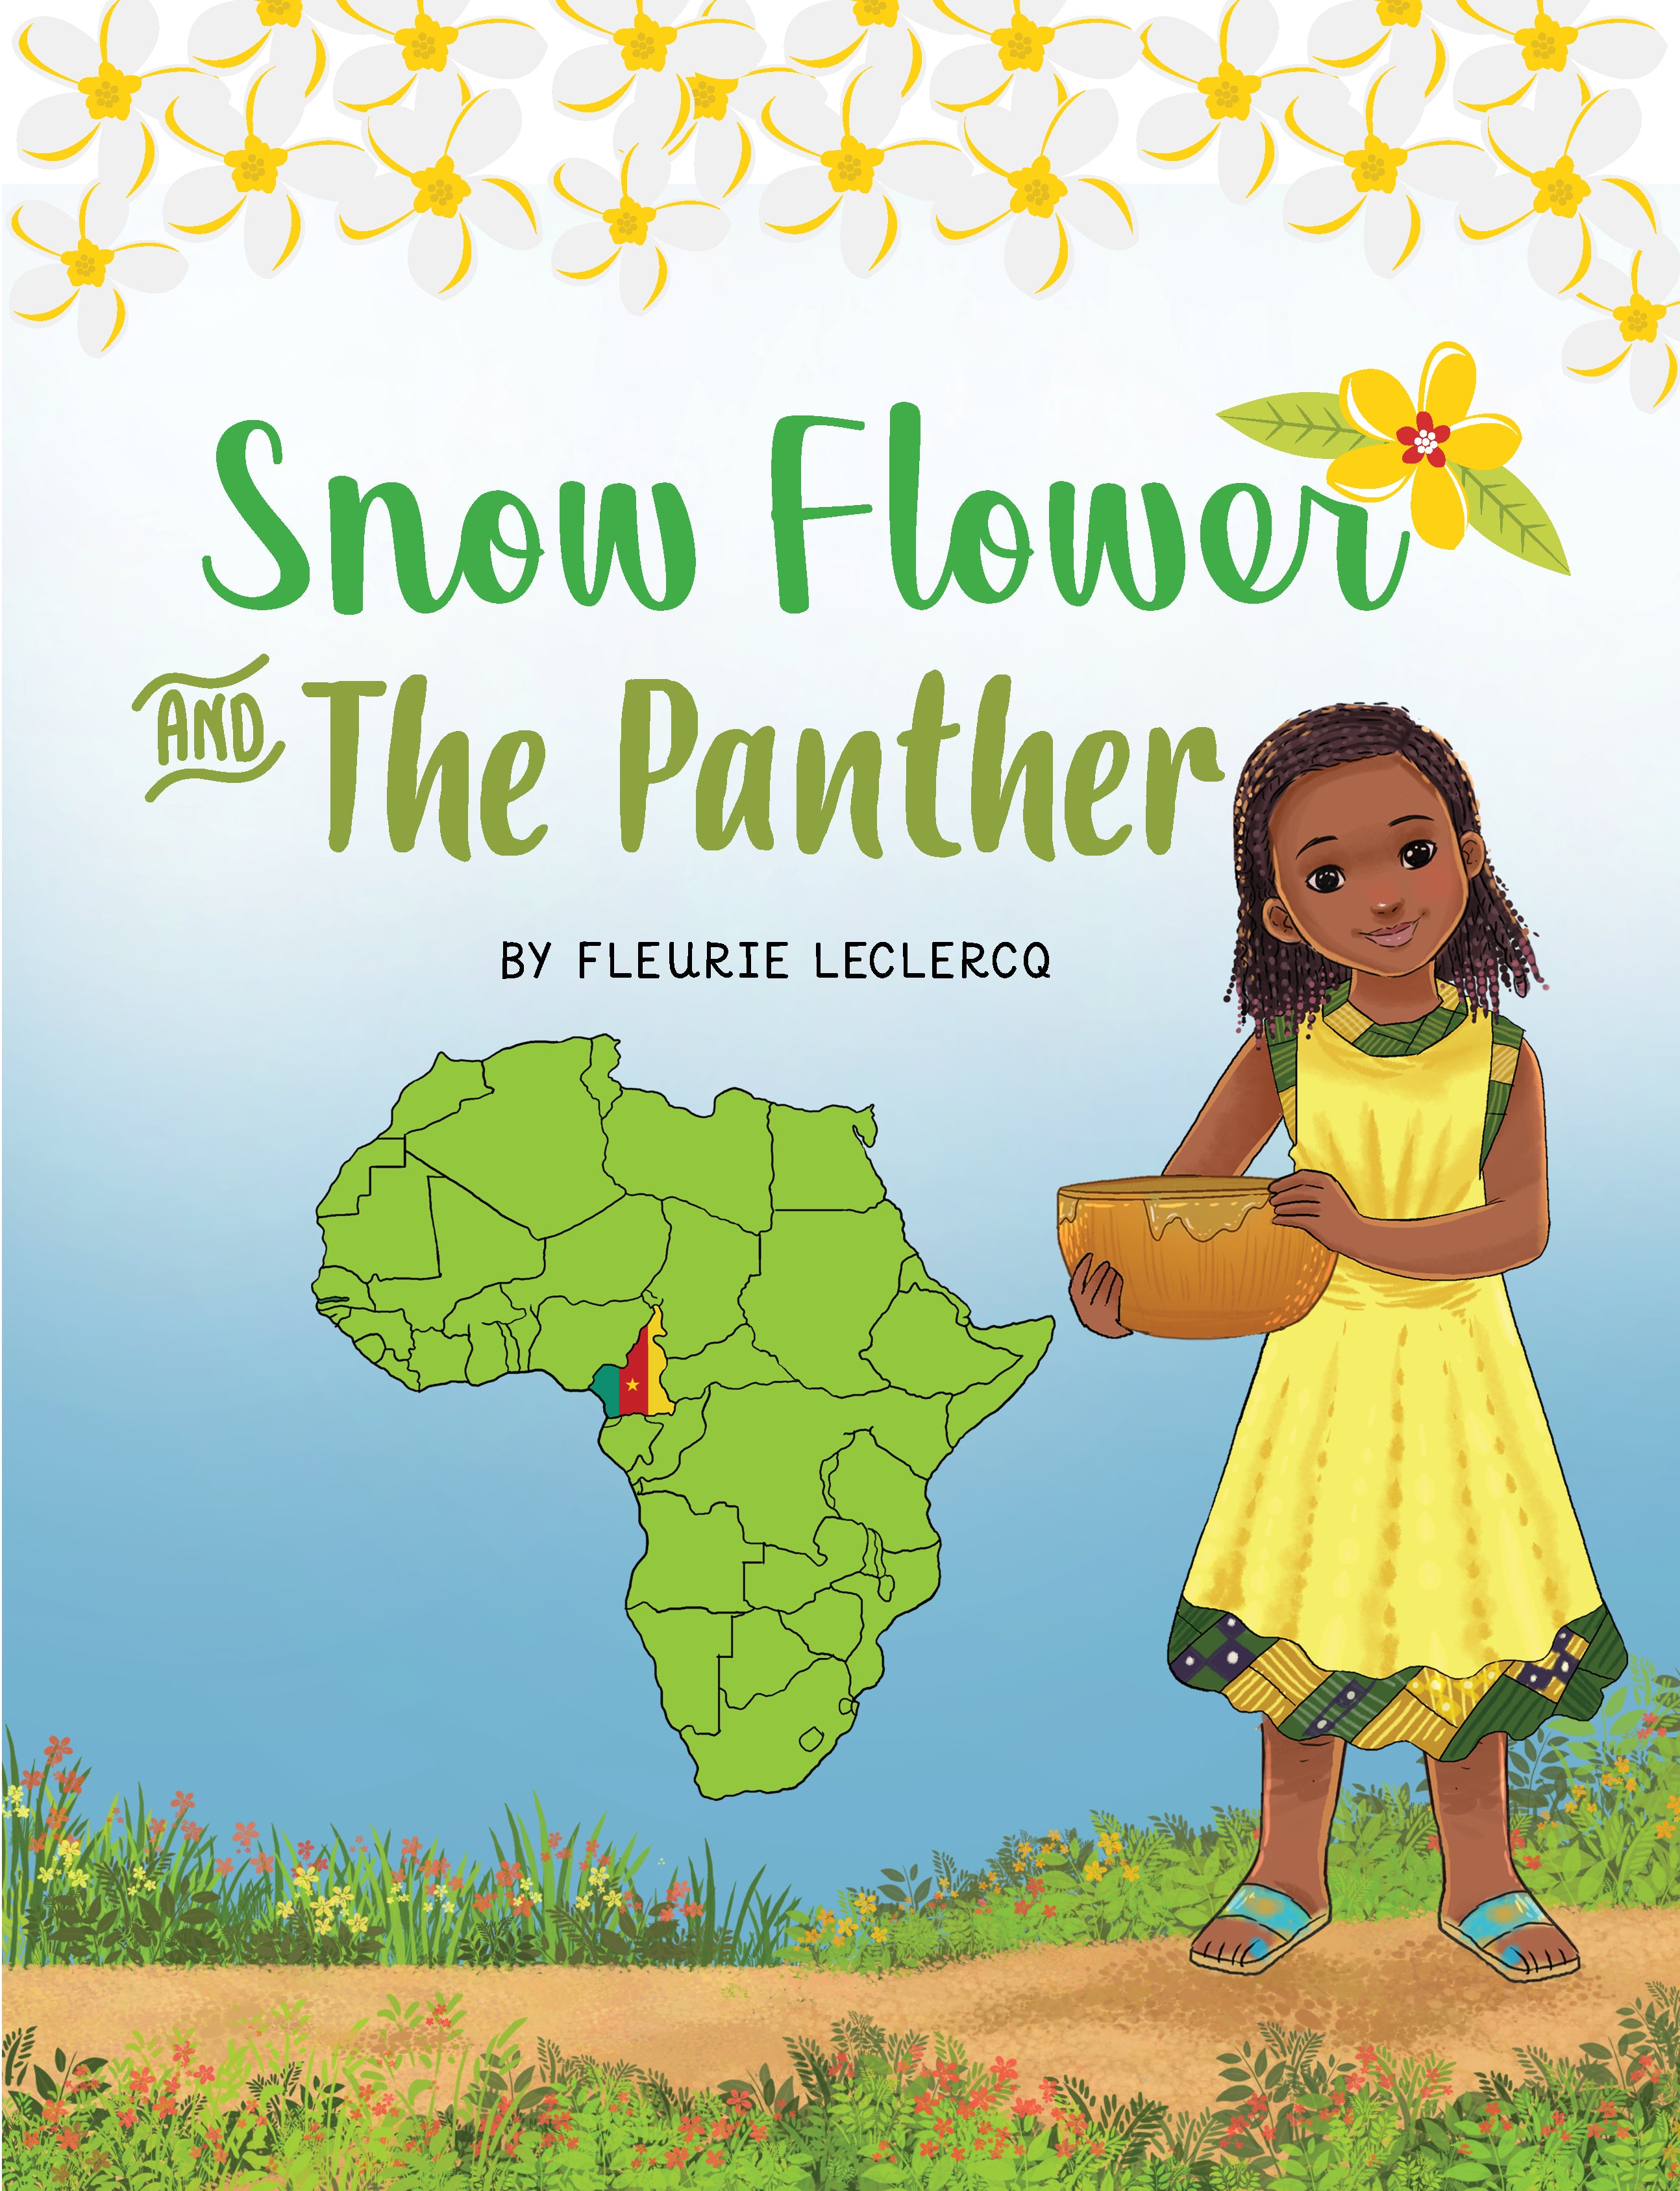 Snow Flower and The Panther (Paperback)